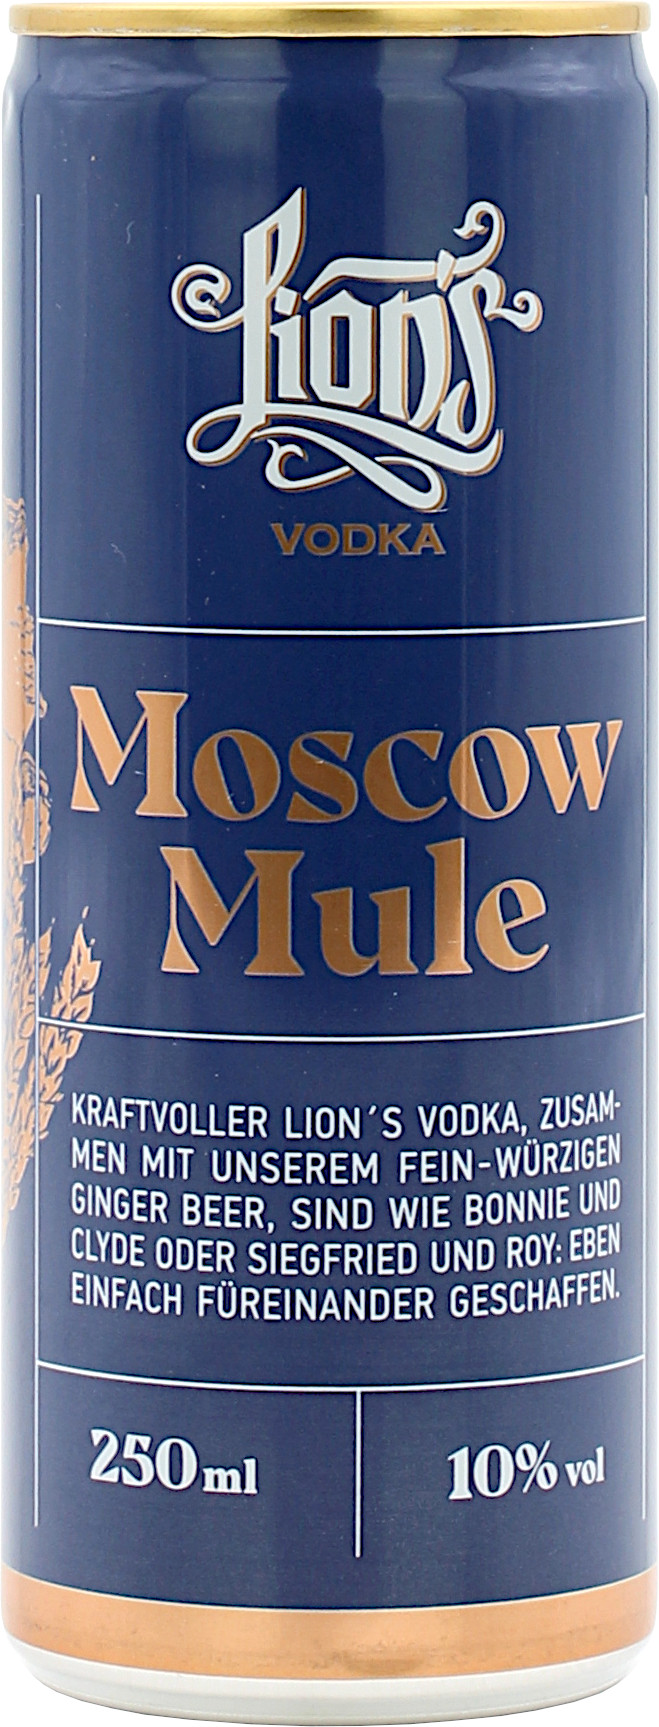 Lions Moscow Mule 10.0% 0,25l (Dose)